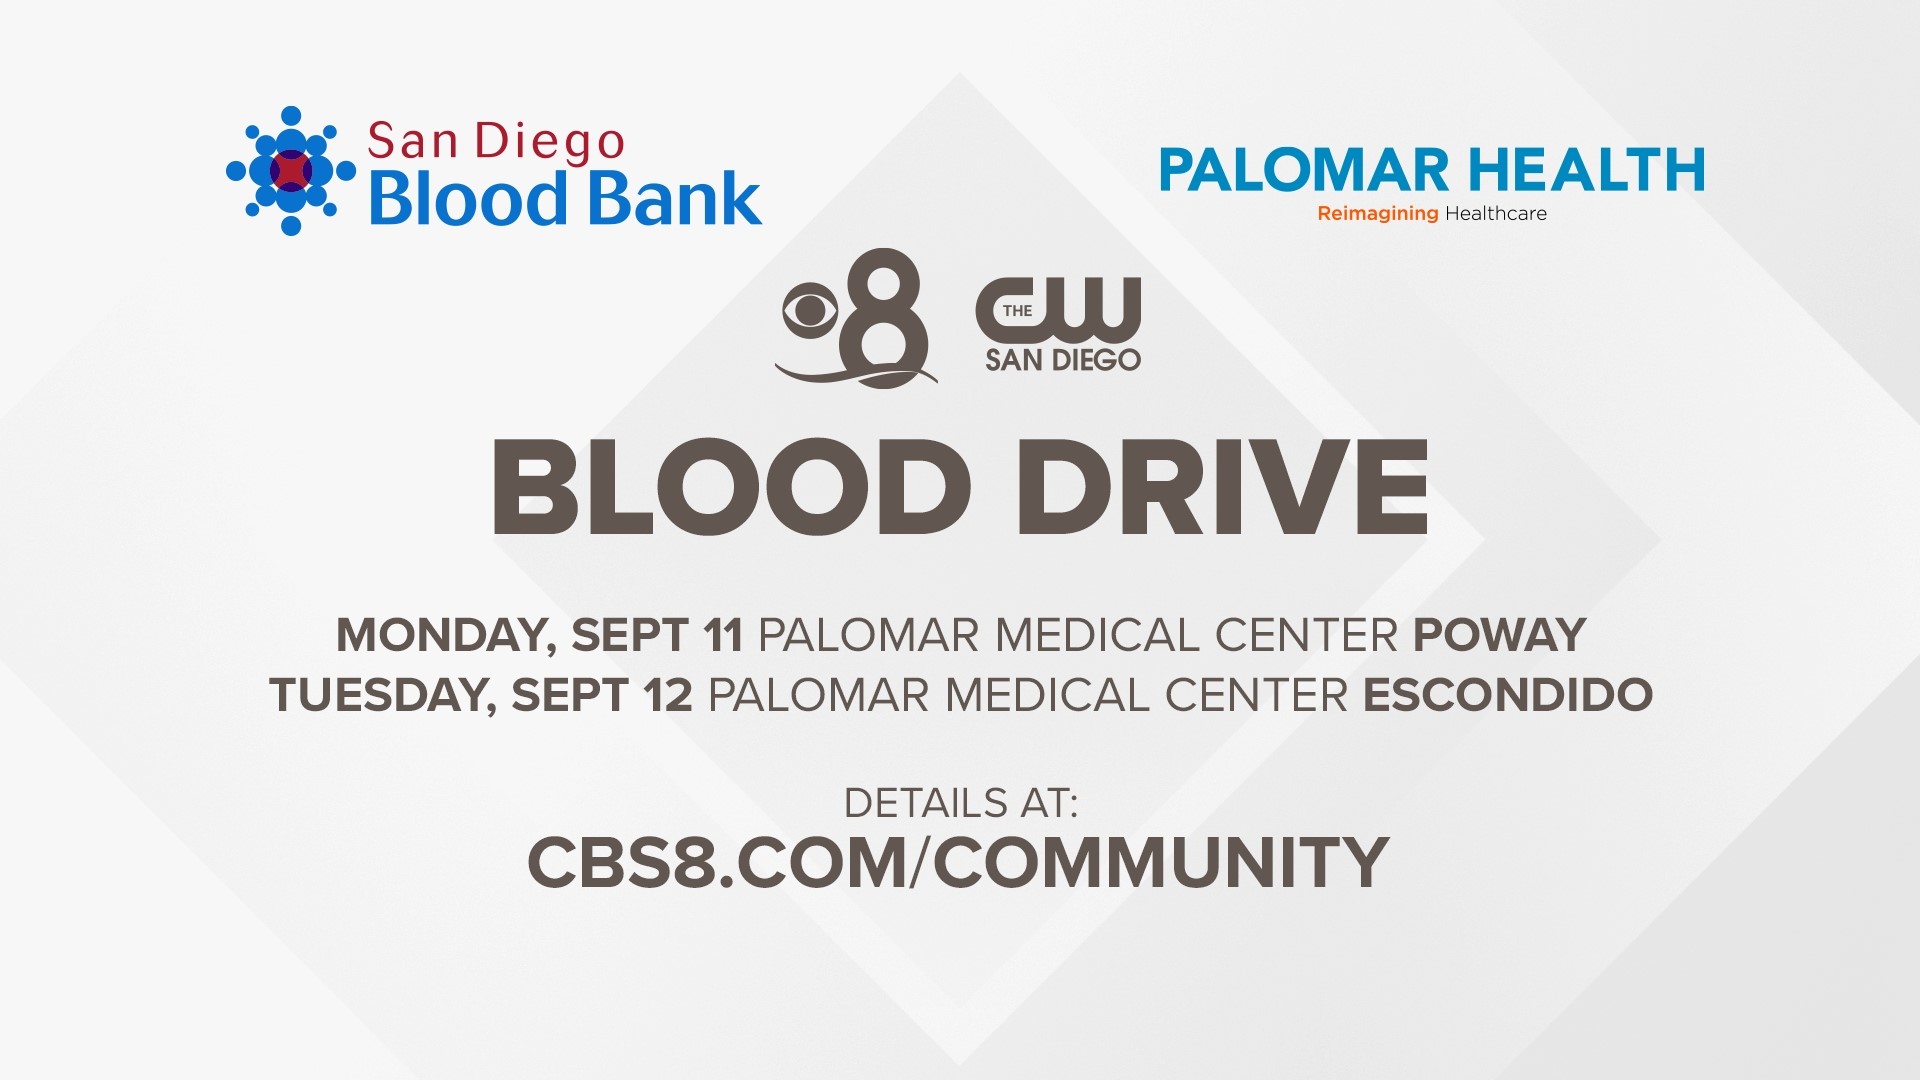 The 2 blood drives will be held Monday, September 11 at Palomar Medical Center in Poway and Tuesday, September 12 at Palomar Medical Center in Escondido.